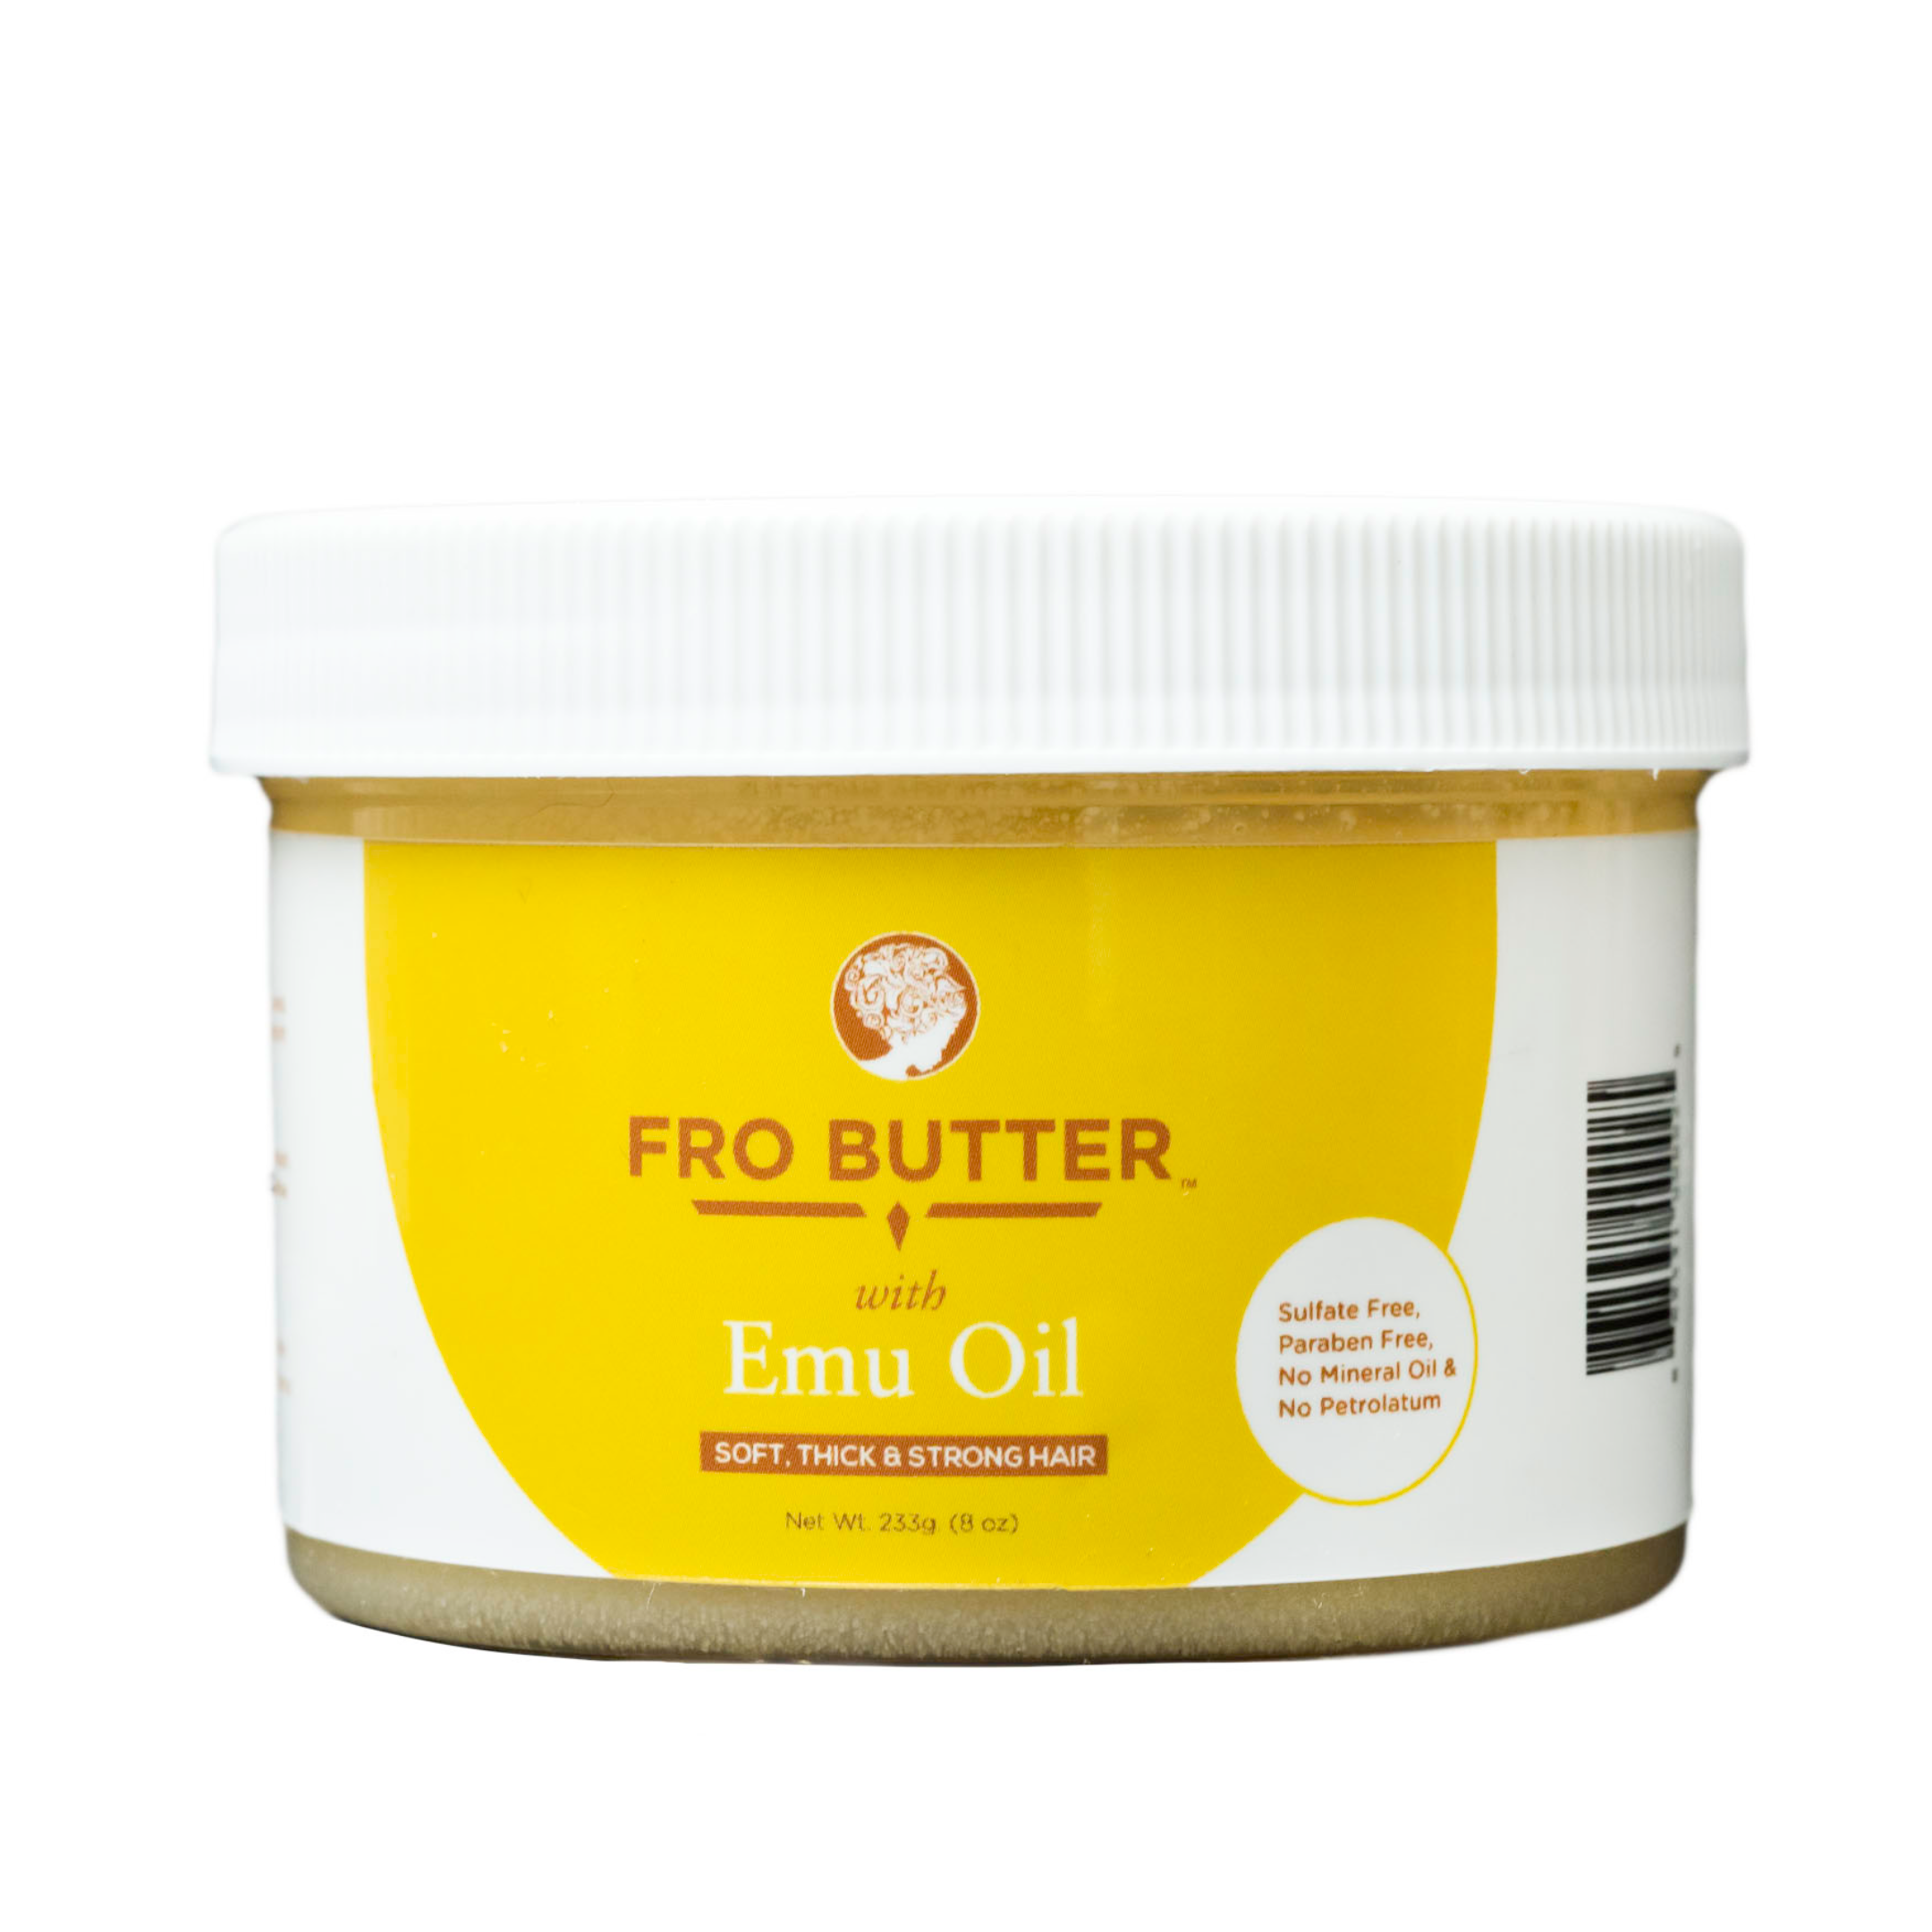 Fro Butter With Emu Oil Hair Growth Treatment